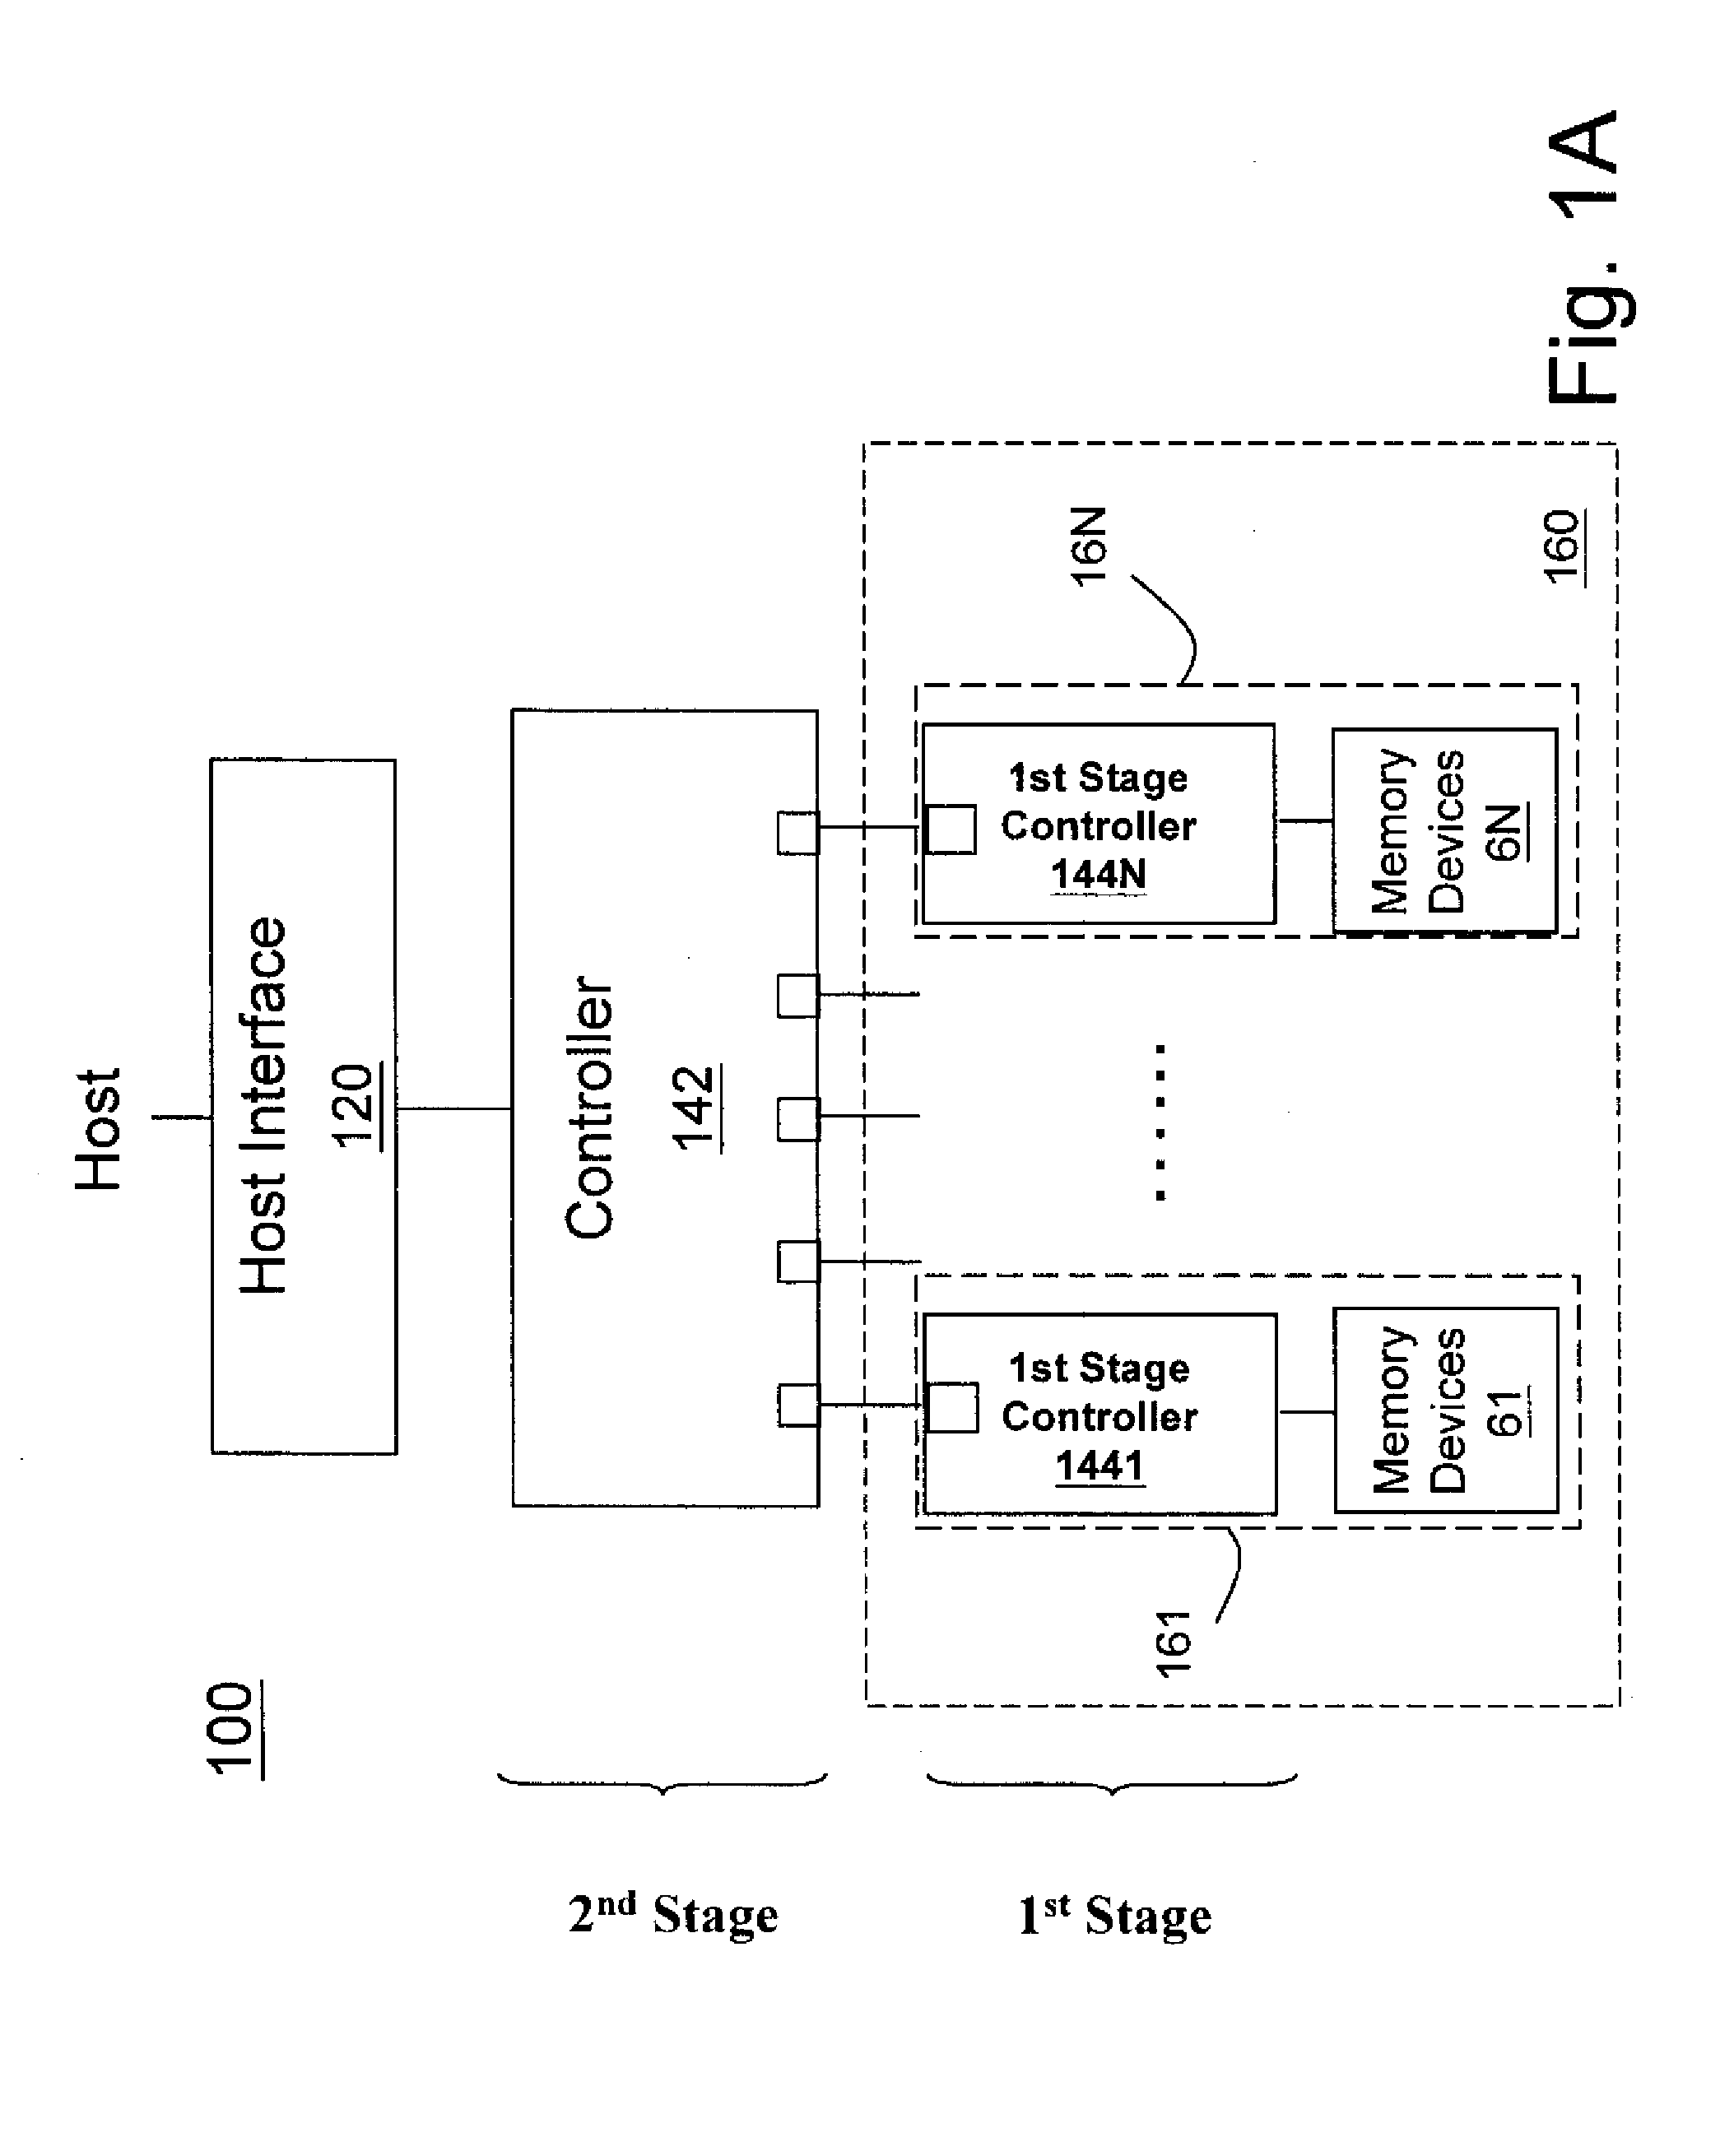 Non-volatile memory data storage system with reliability management